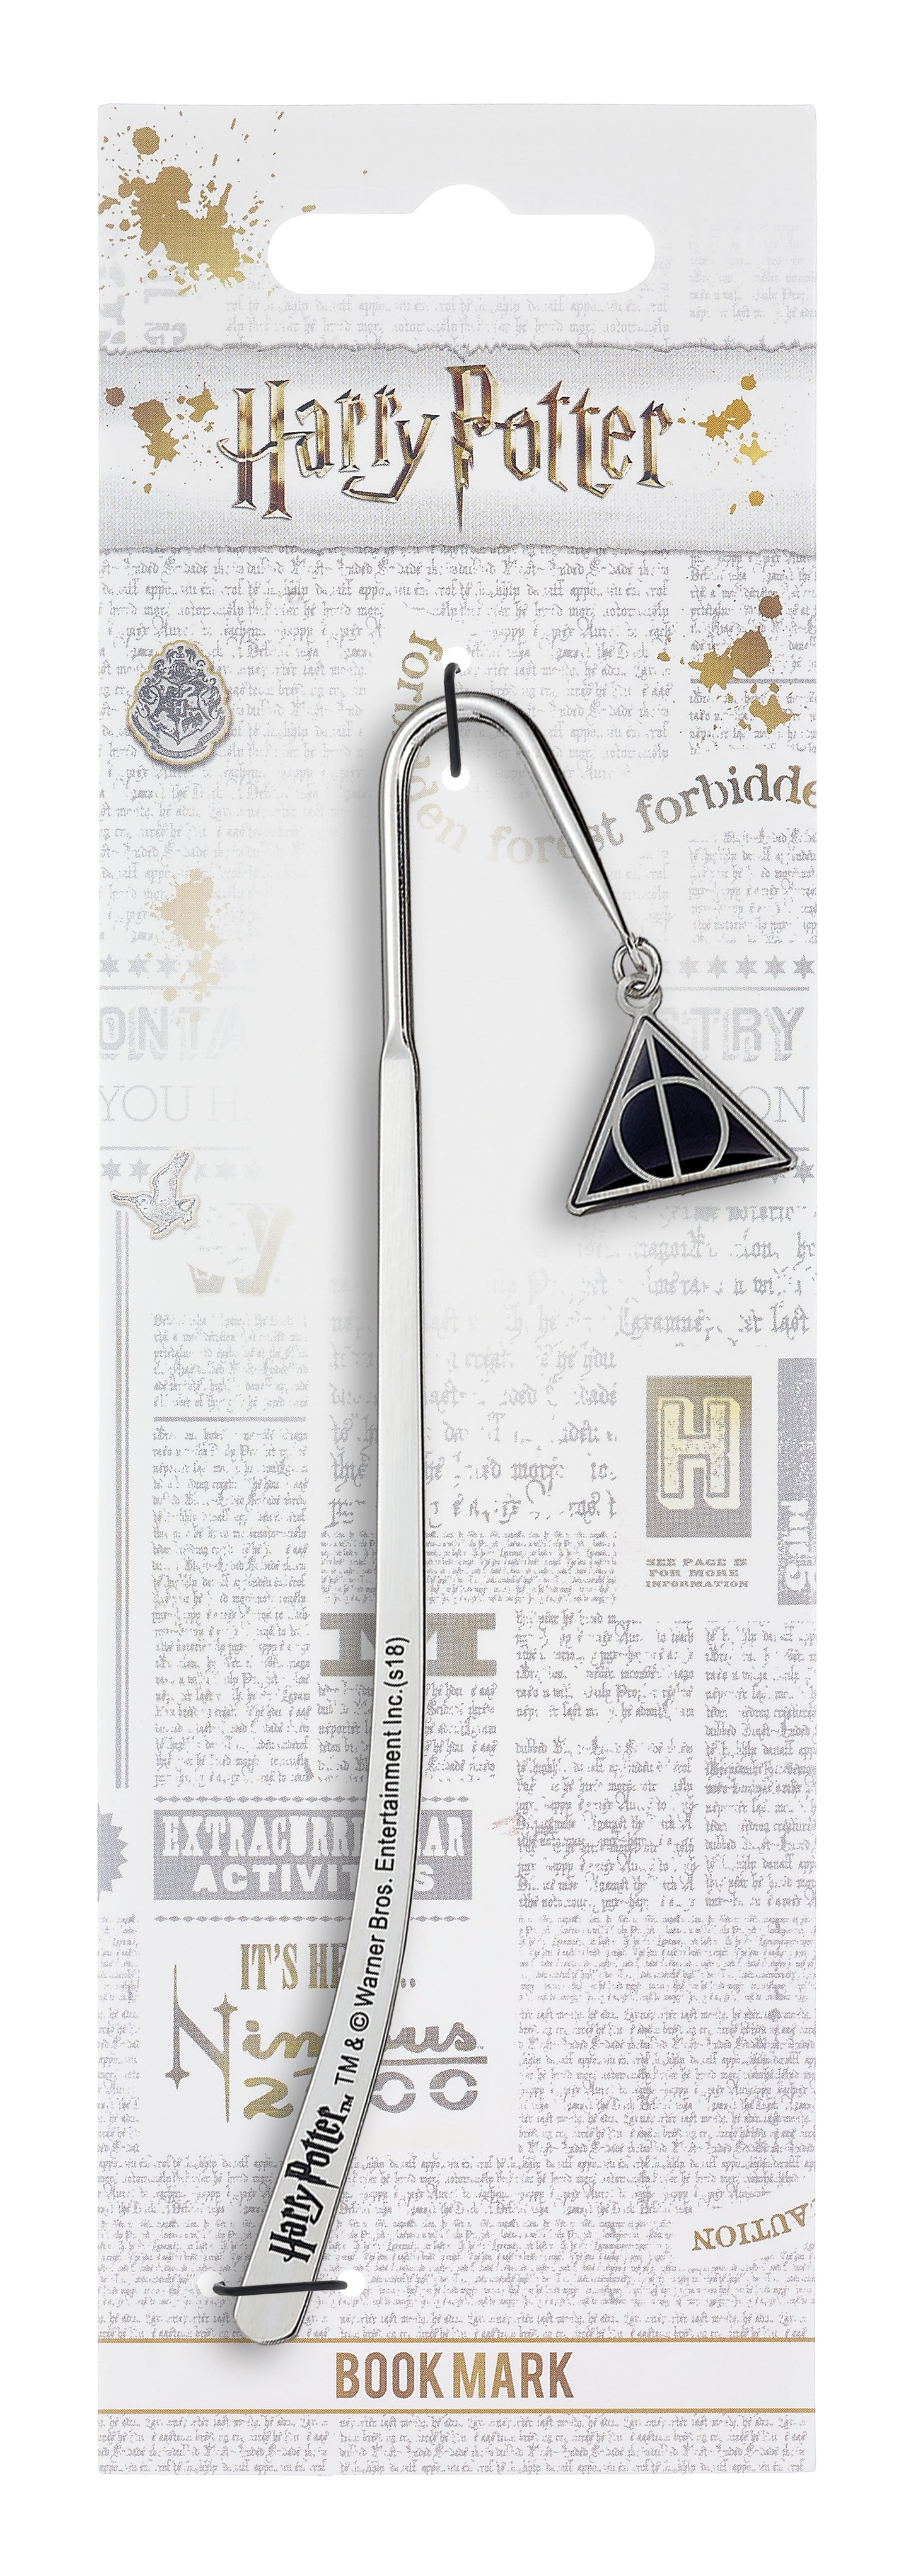 Harry Potter Deathly Hallows Bookmark - Silver